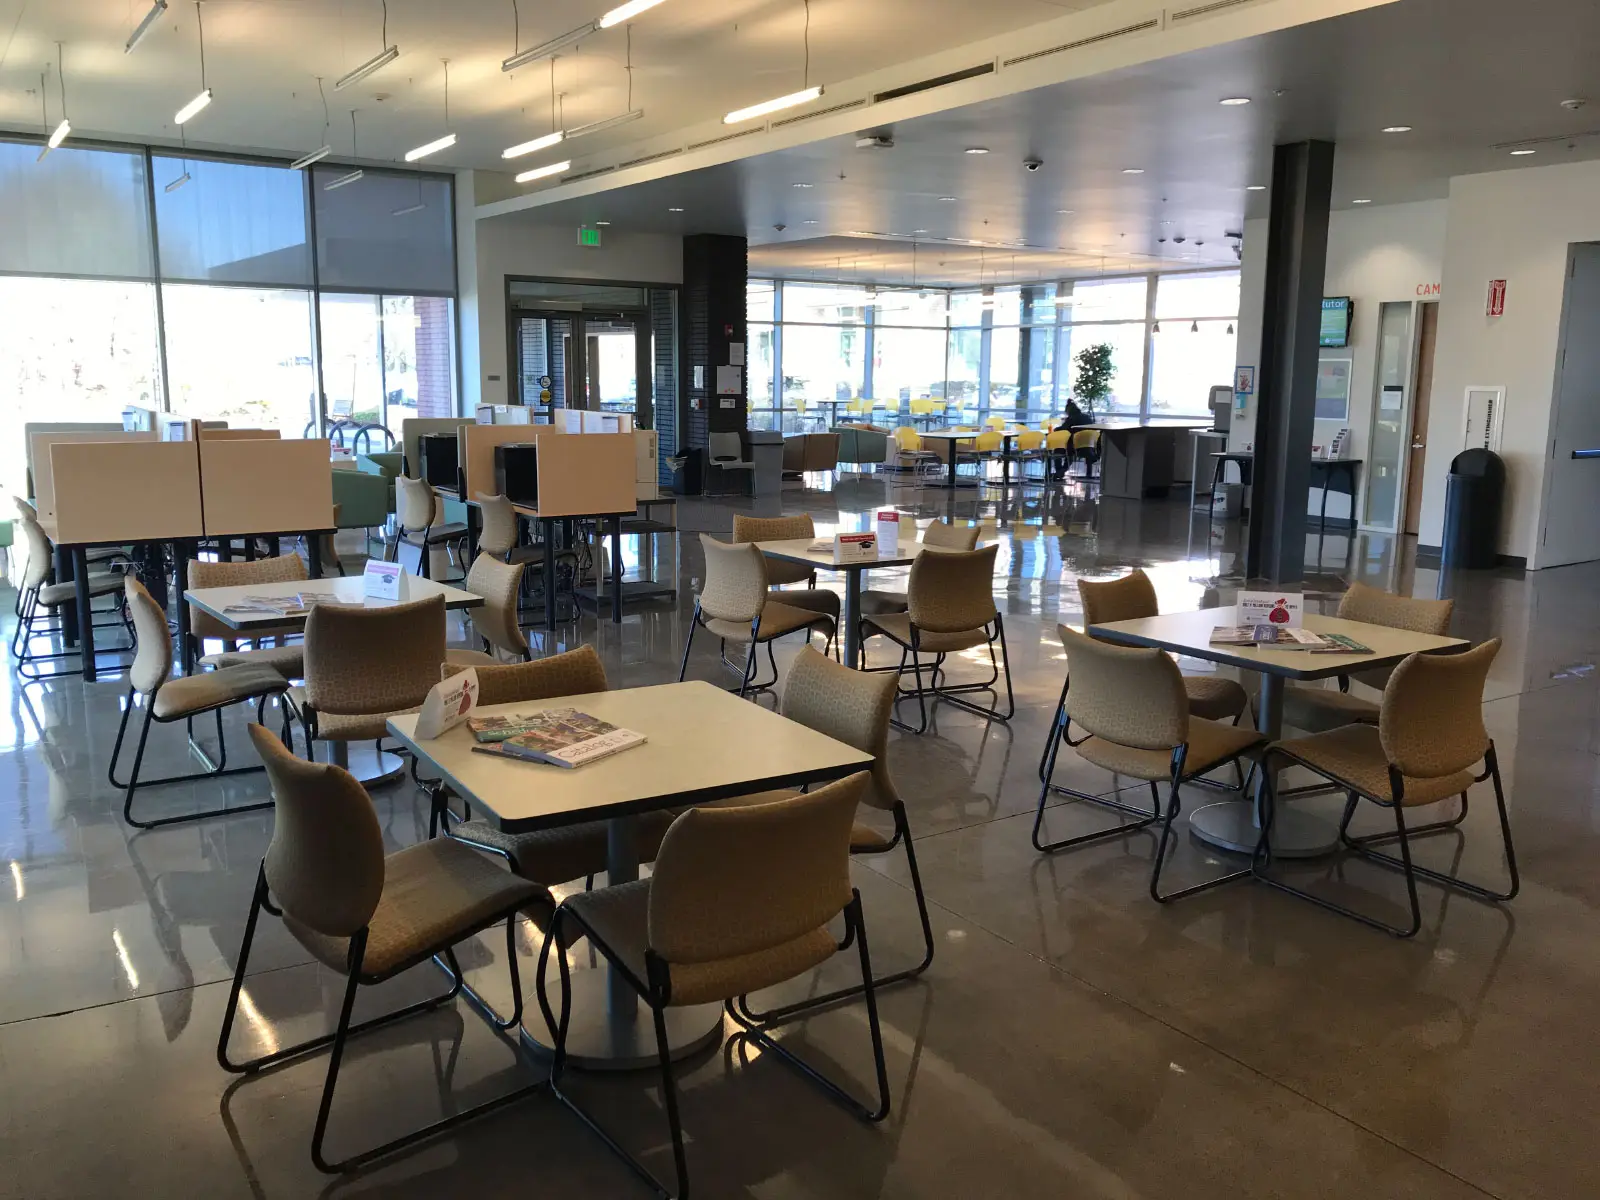 Series of chairs and small tables in Harmony Campus lobby